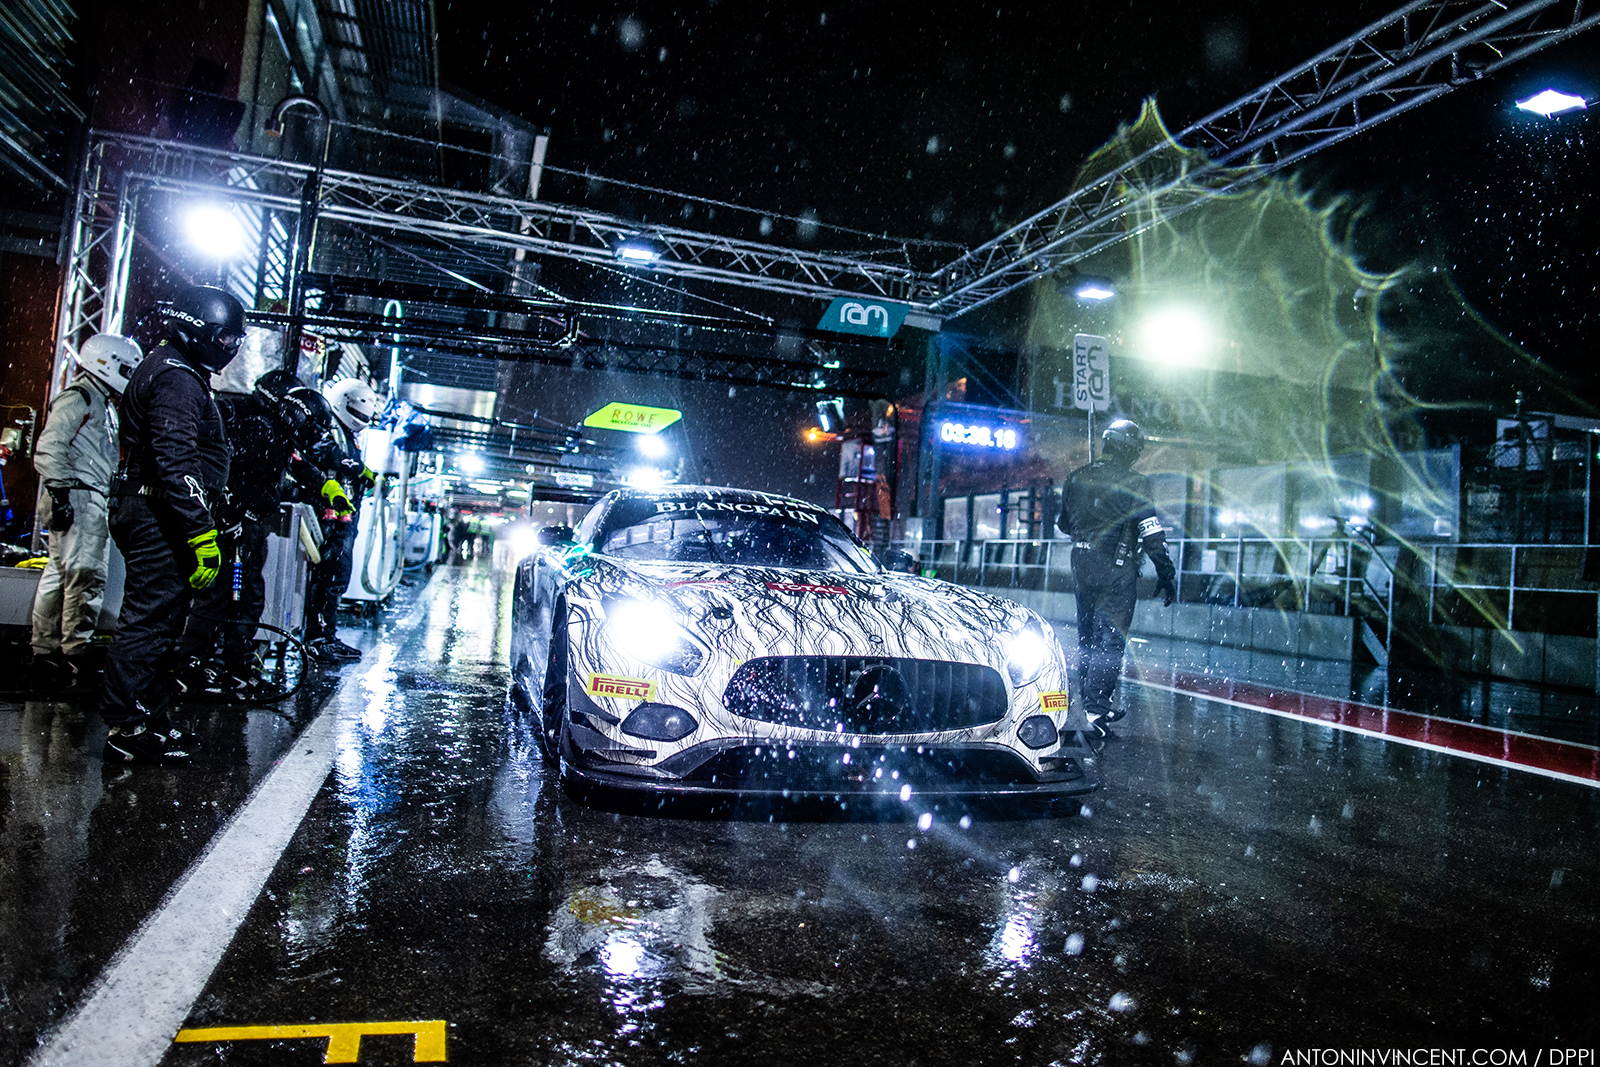 74 VOS Remon, BURKE Darren, Tom ONSLOW-COLE, FRANKENHOUT Christiaan, Mercedes-AMG GT3, Ram Racing, action during the 2019 Blancpain Endurance Series championship 24 Hours of Spa, from July 24 to 28,  Spa Francorchamps, Belgium - Photo Antonin Vincent / DPPI